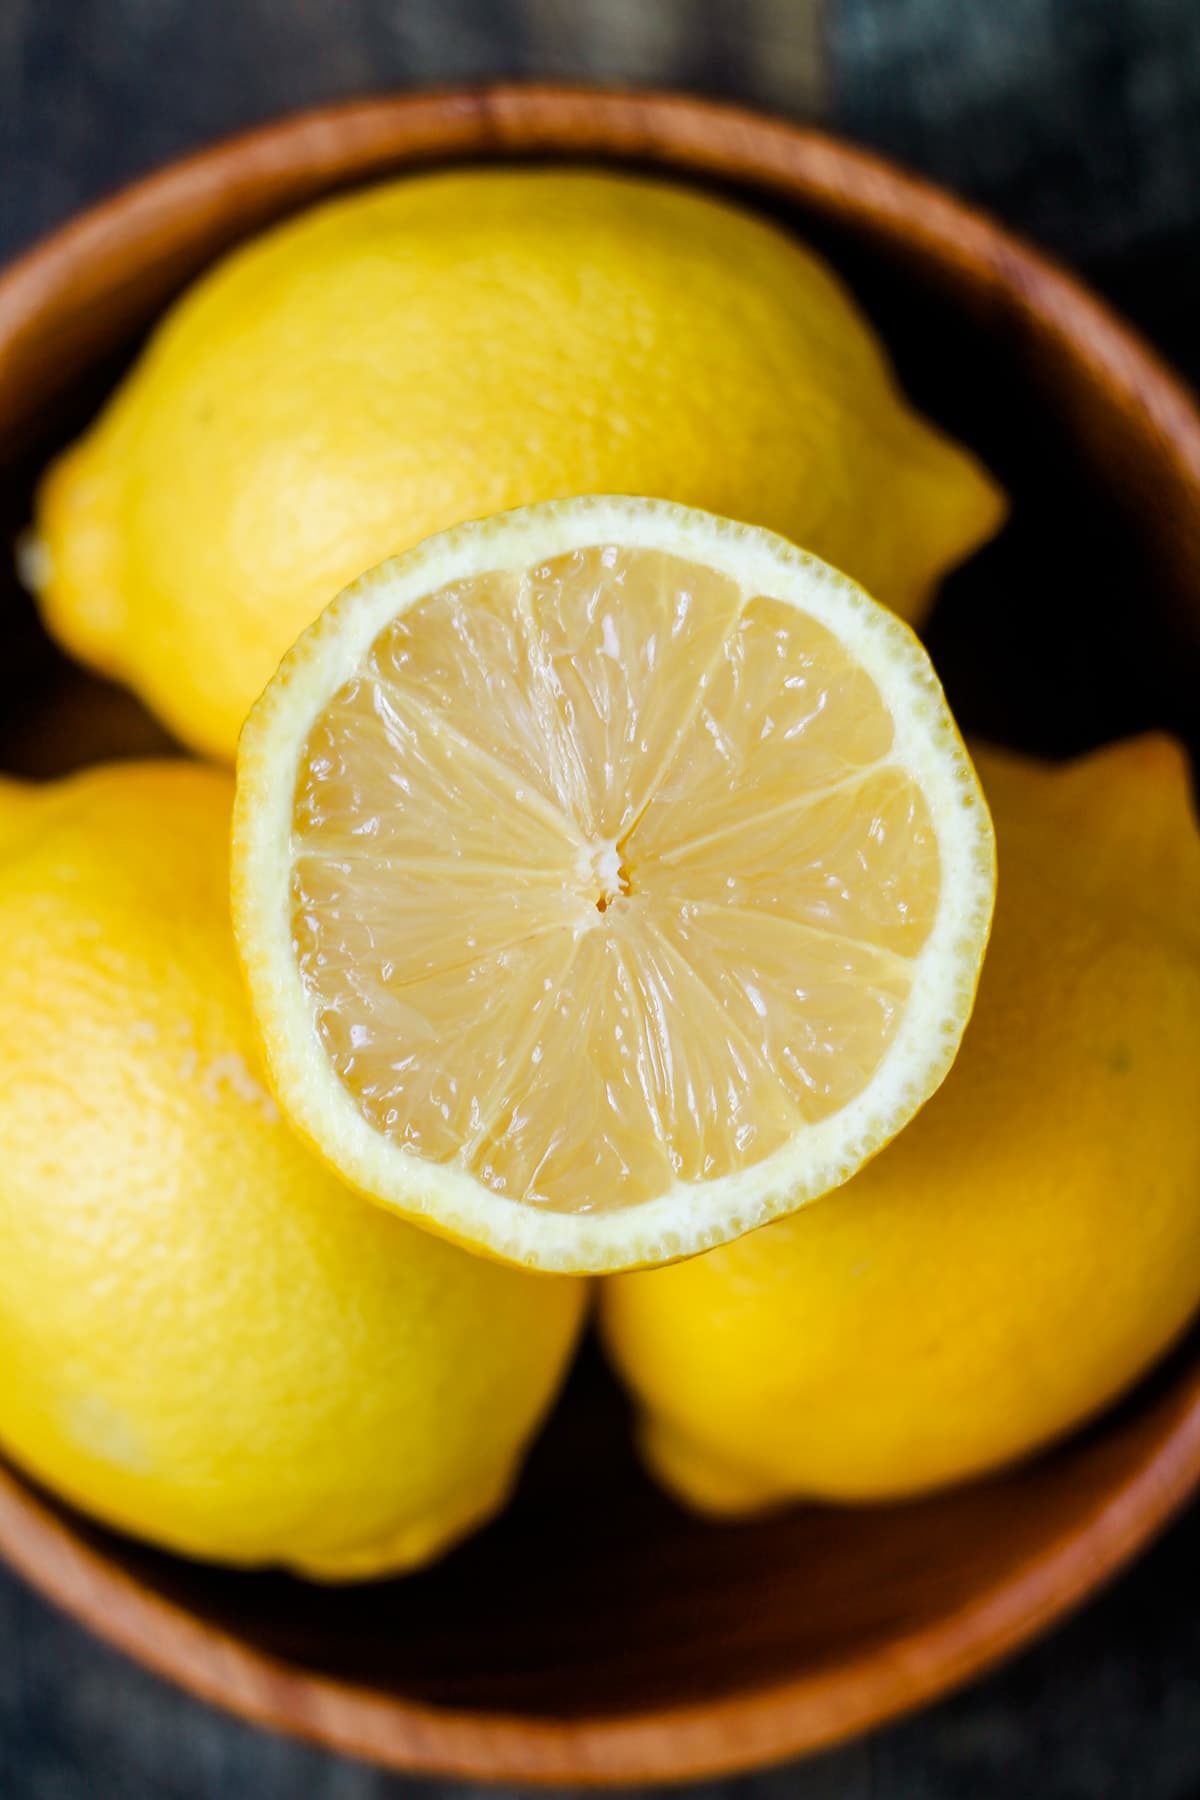 A bowl of lemons ready to be juiced.